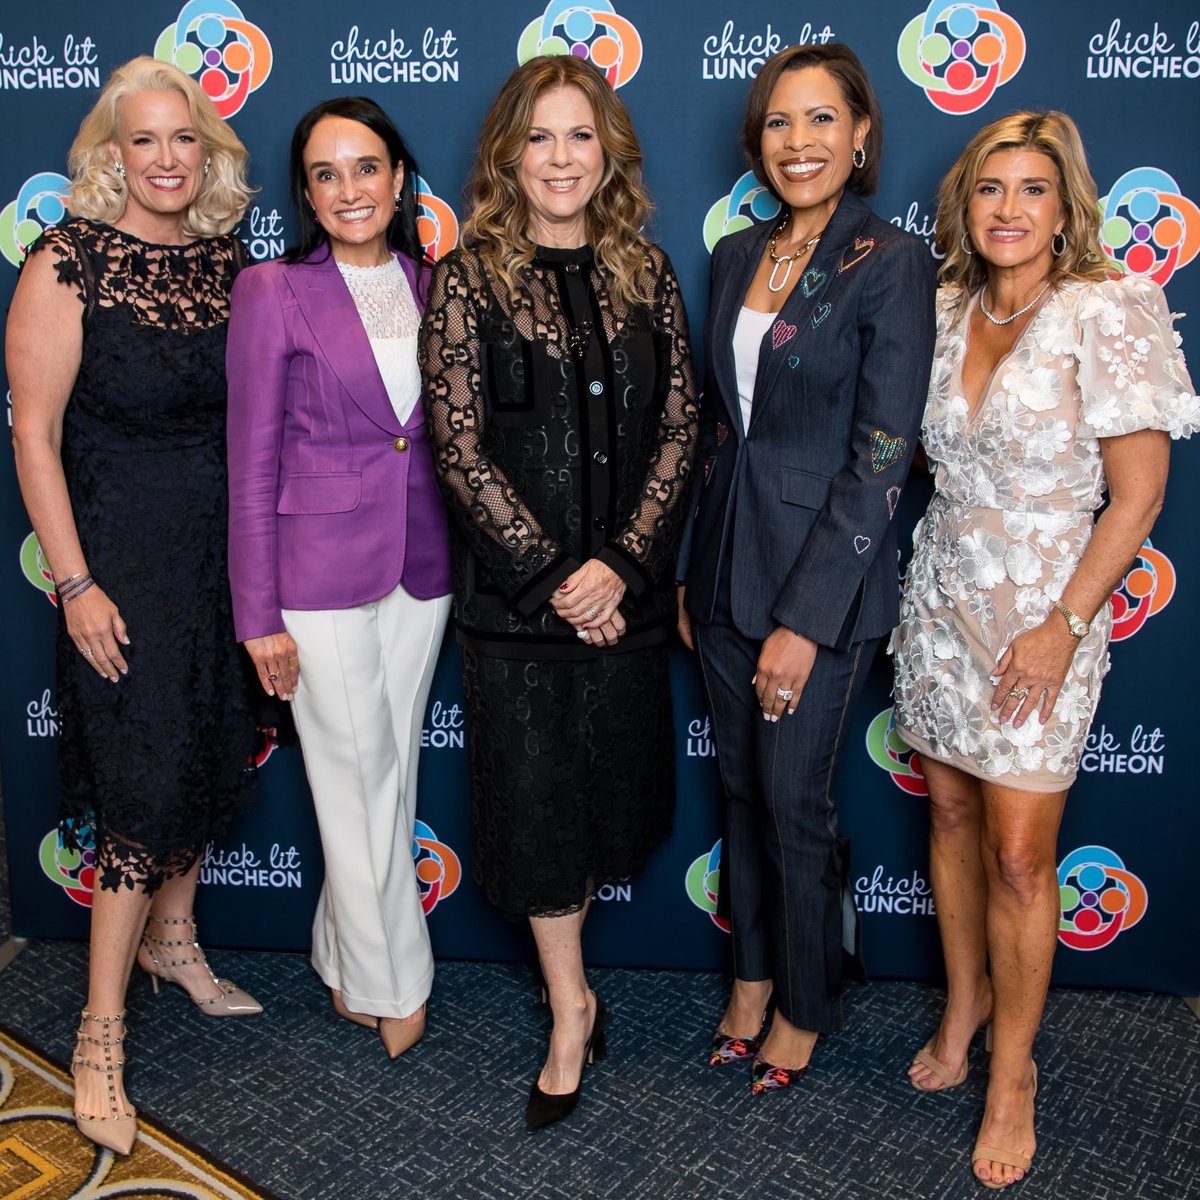 What a day at the Chick Lit Luncheon this weekend! It was a pleasure speaking to such an extraordinary room of women. The event benefited the Community Partners of Dallas for a great cause. Thank you @LauraHarrisNBC5 for a fun conversation and for being an incredible moderator!